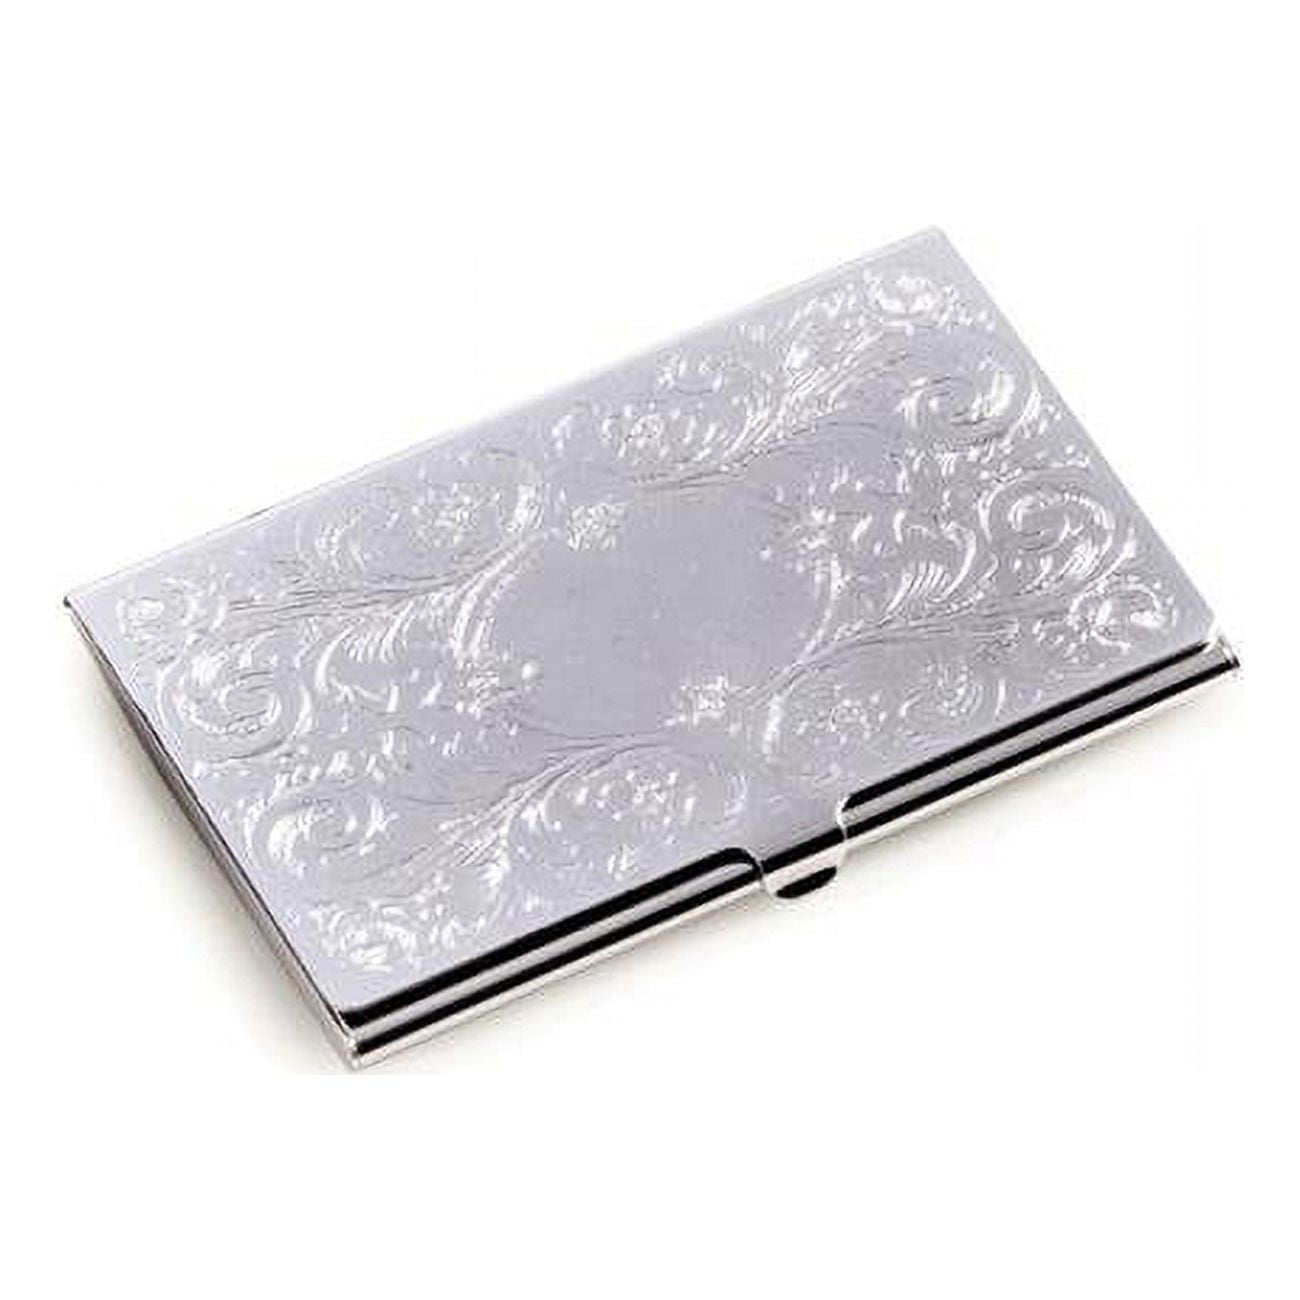 Picture of Bey-Berk International D273S Silver Plated Business Card Case with Filigree &amp; Oval Design 